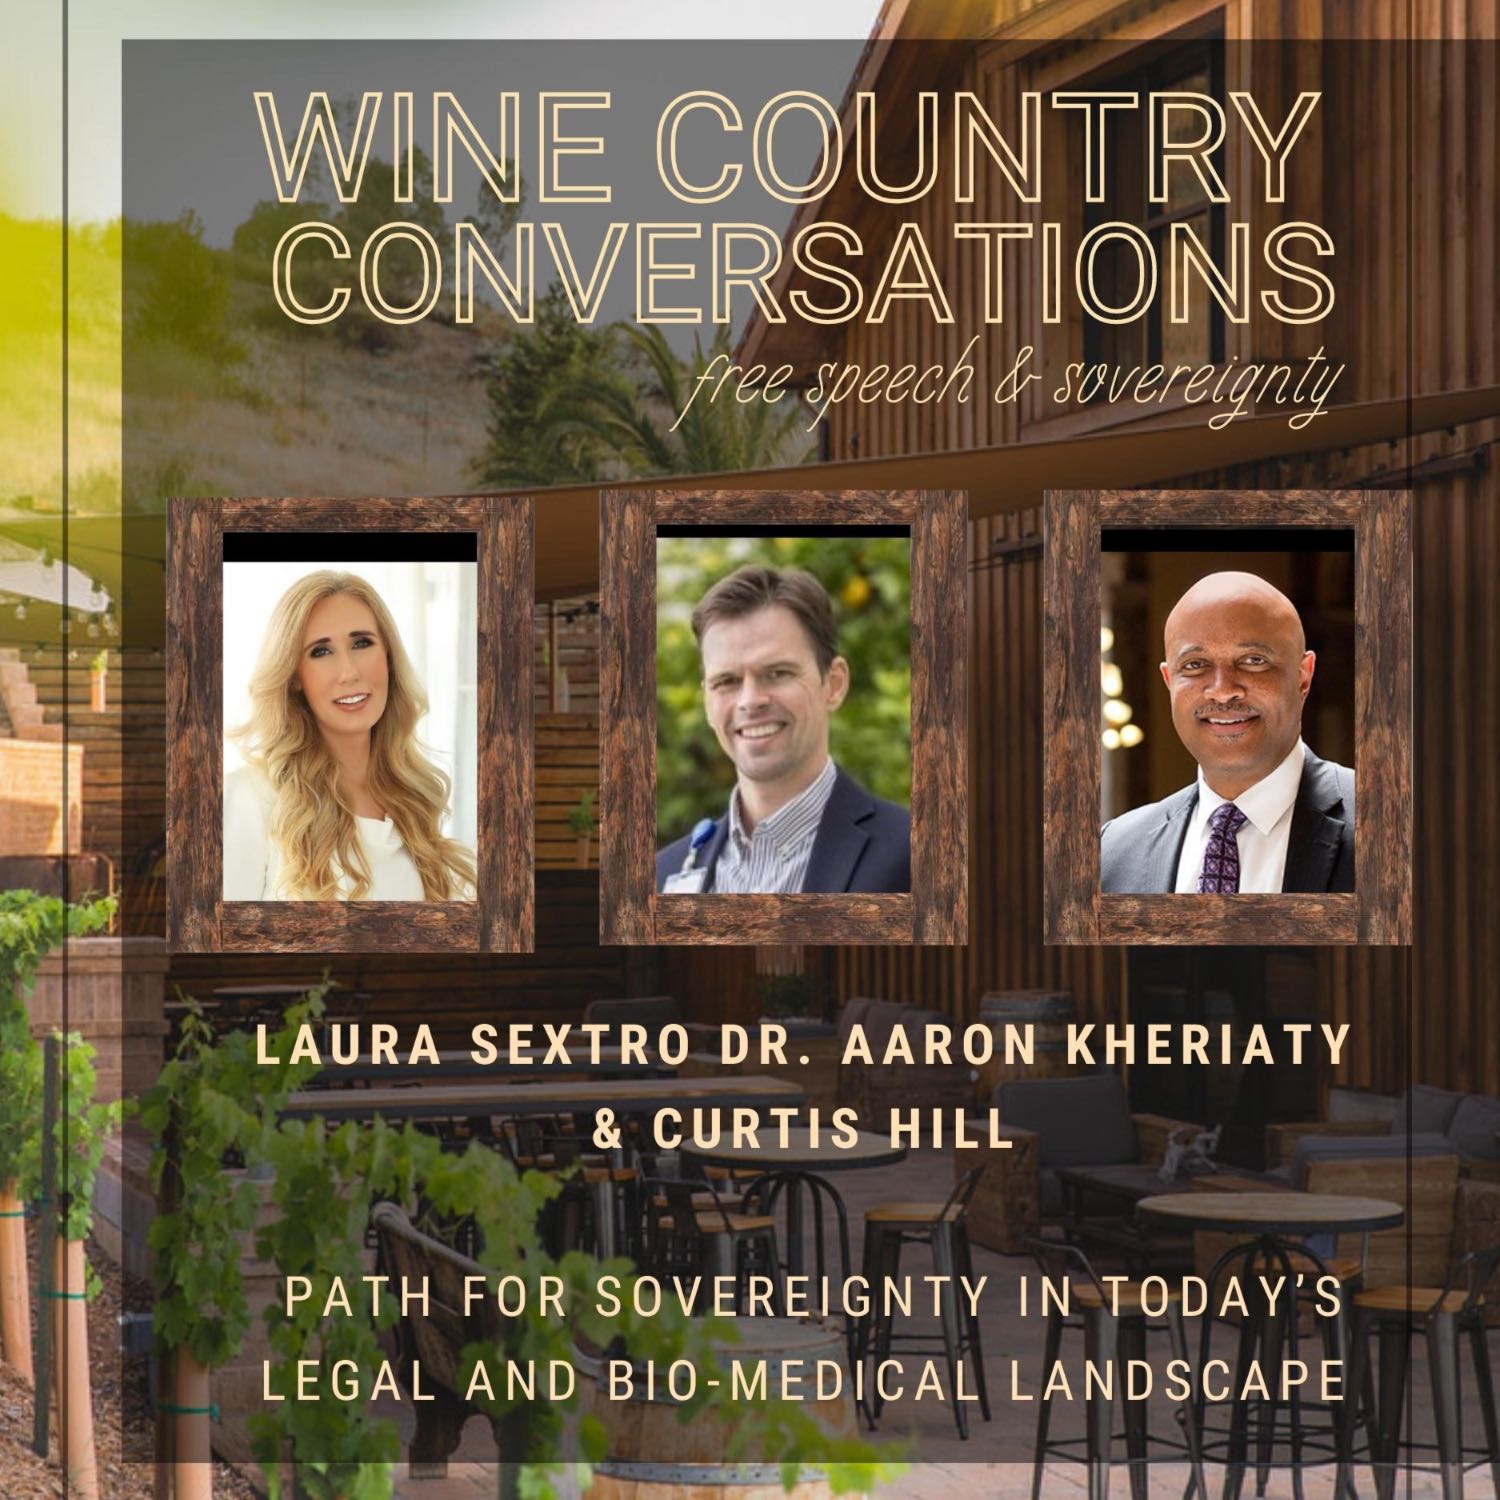 The Unity Project Wine Country Conversations | Dr. Kheriaty, Curtis Hill & Laura Sextro